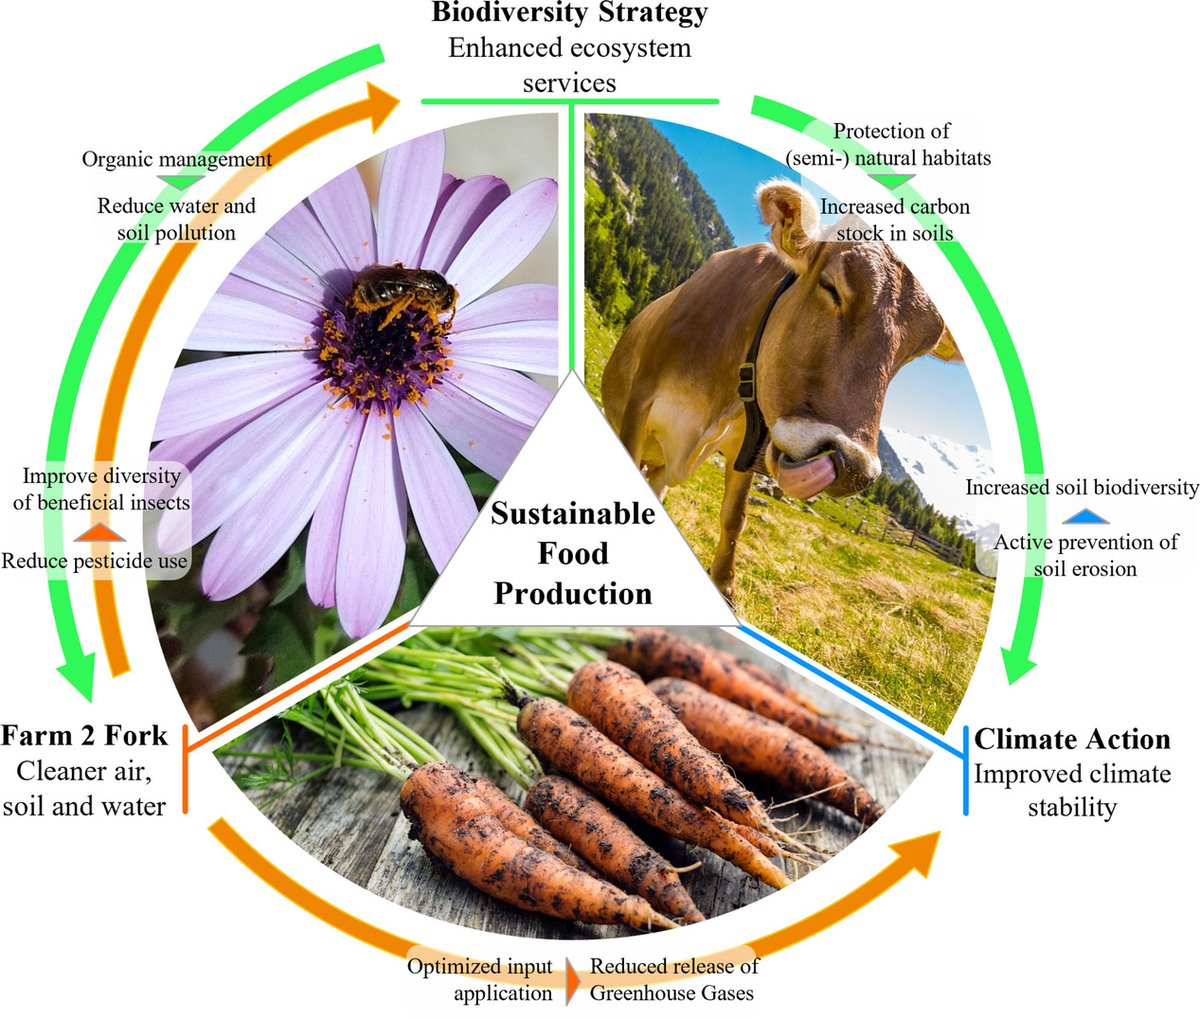 Out in @ConBiology Opportunities and challenges for Common Agricultural Policy reform to support the EU Green Deal We discuss (mis)alignment between 2 key EU policies and the need for proper control of CAP Strategic Plans @IvonneCuadros @andreacrasto doi.org/10.1111/cobi.1…